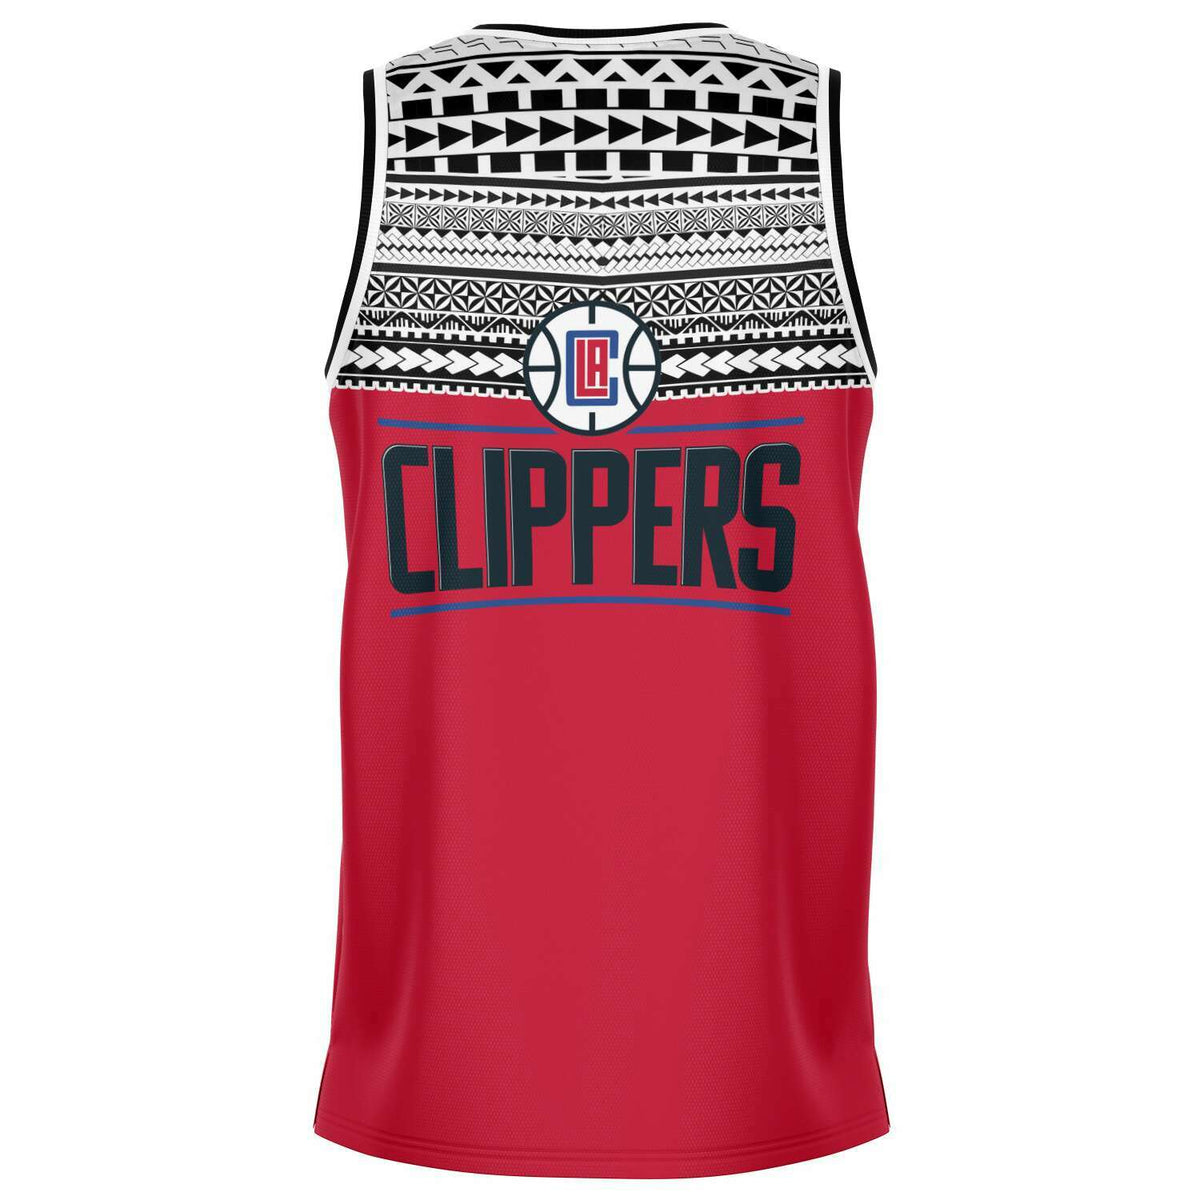 la clippers basketball jersey